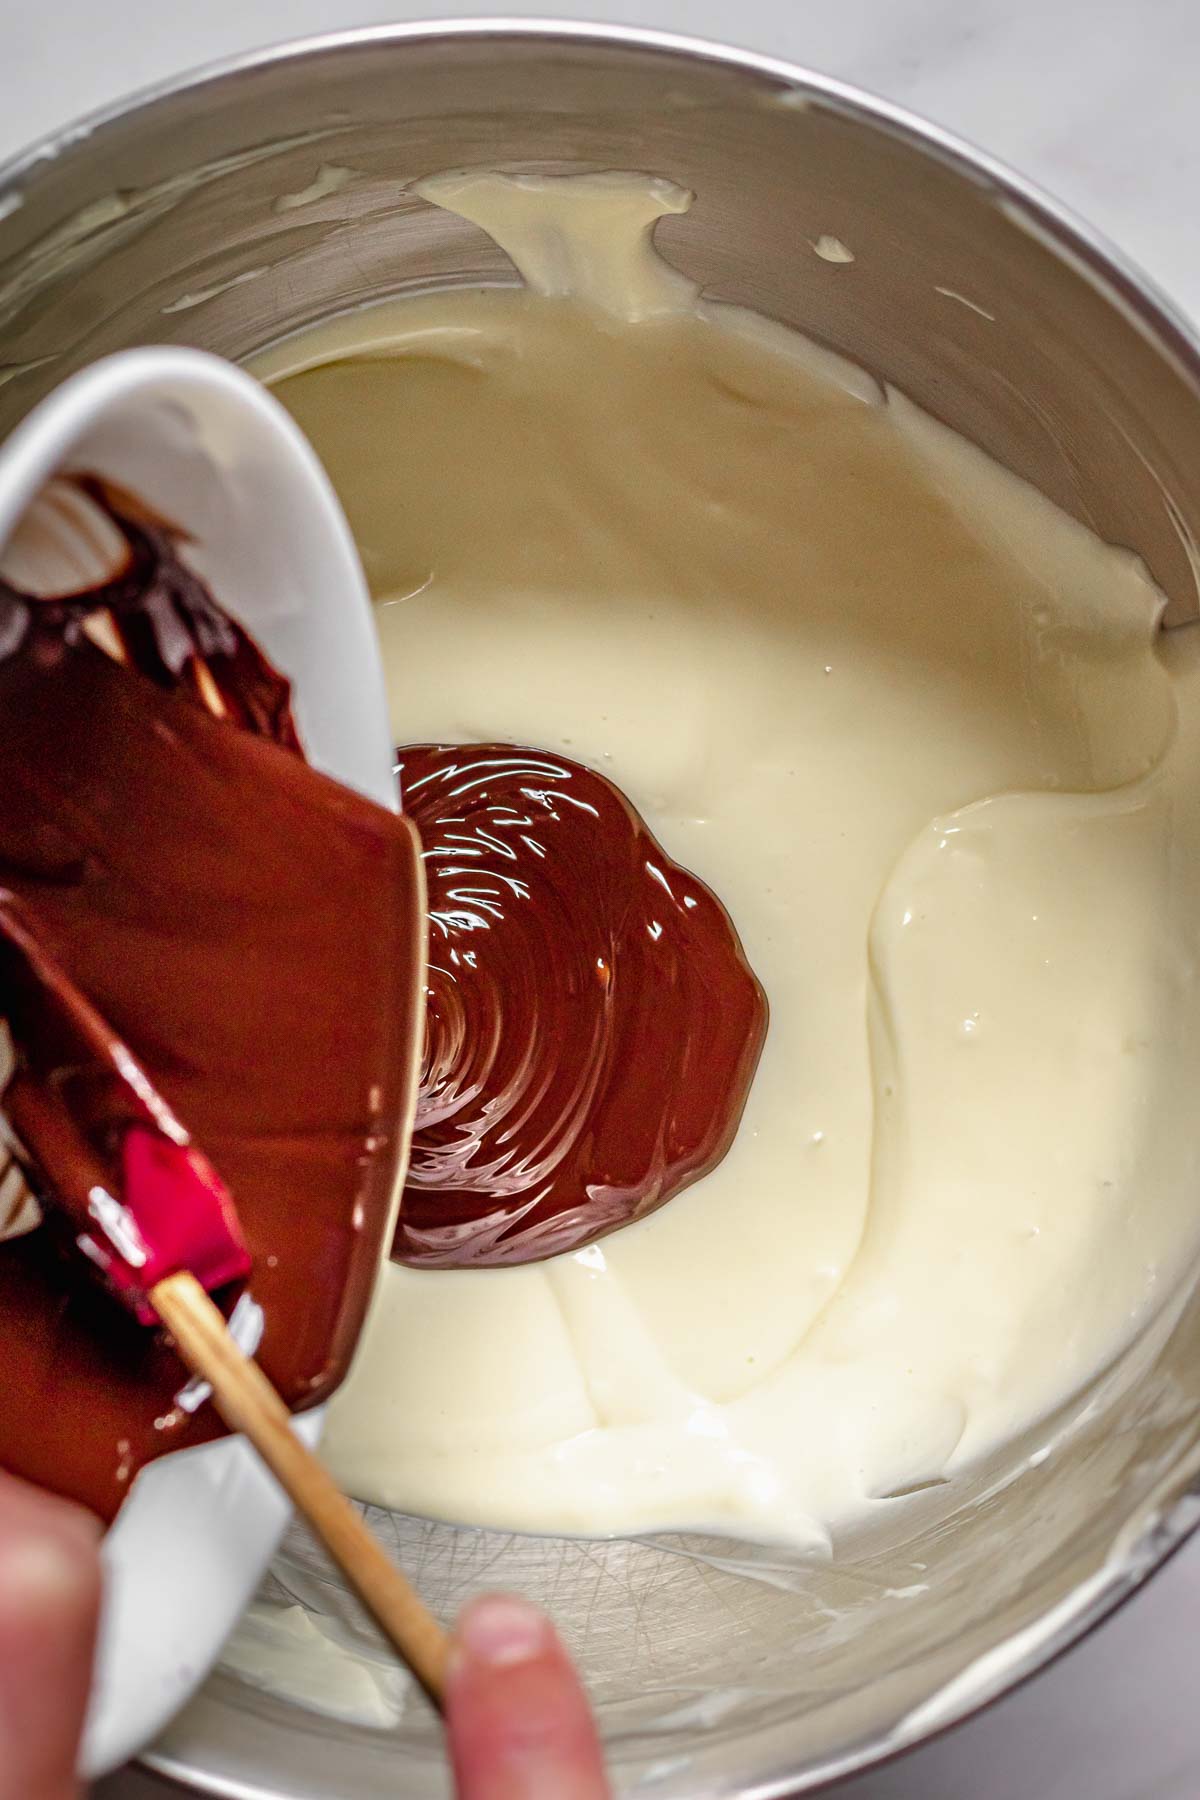 Melted chocolate being poured into cheesecake batter.